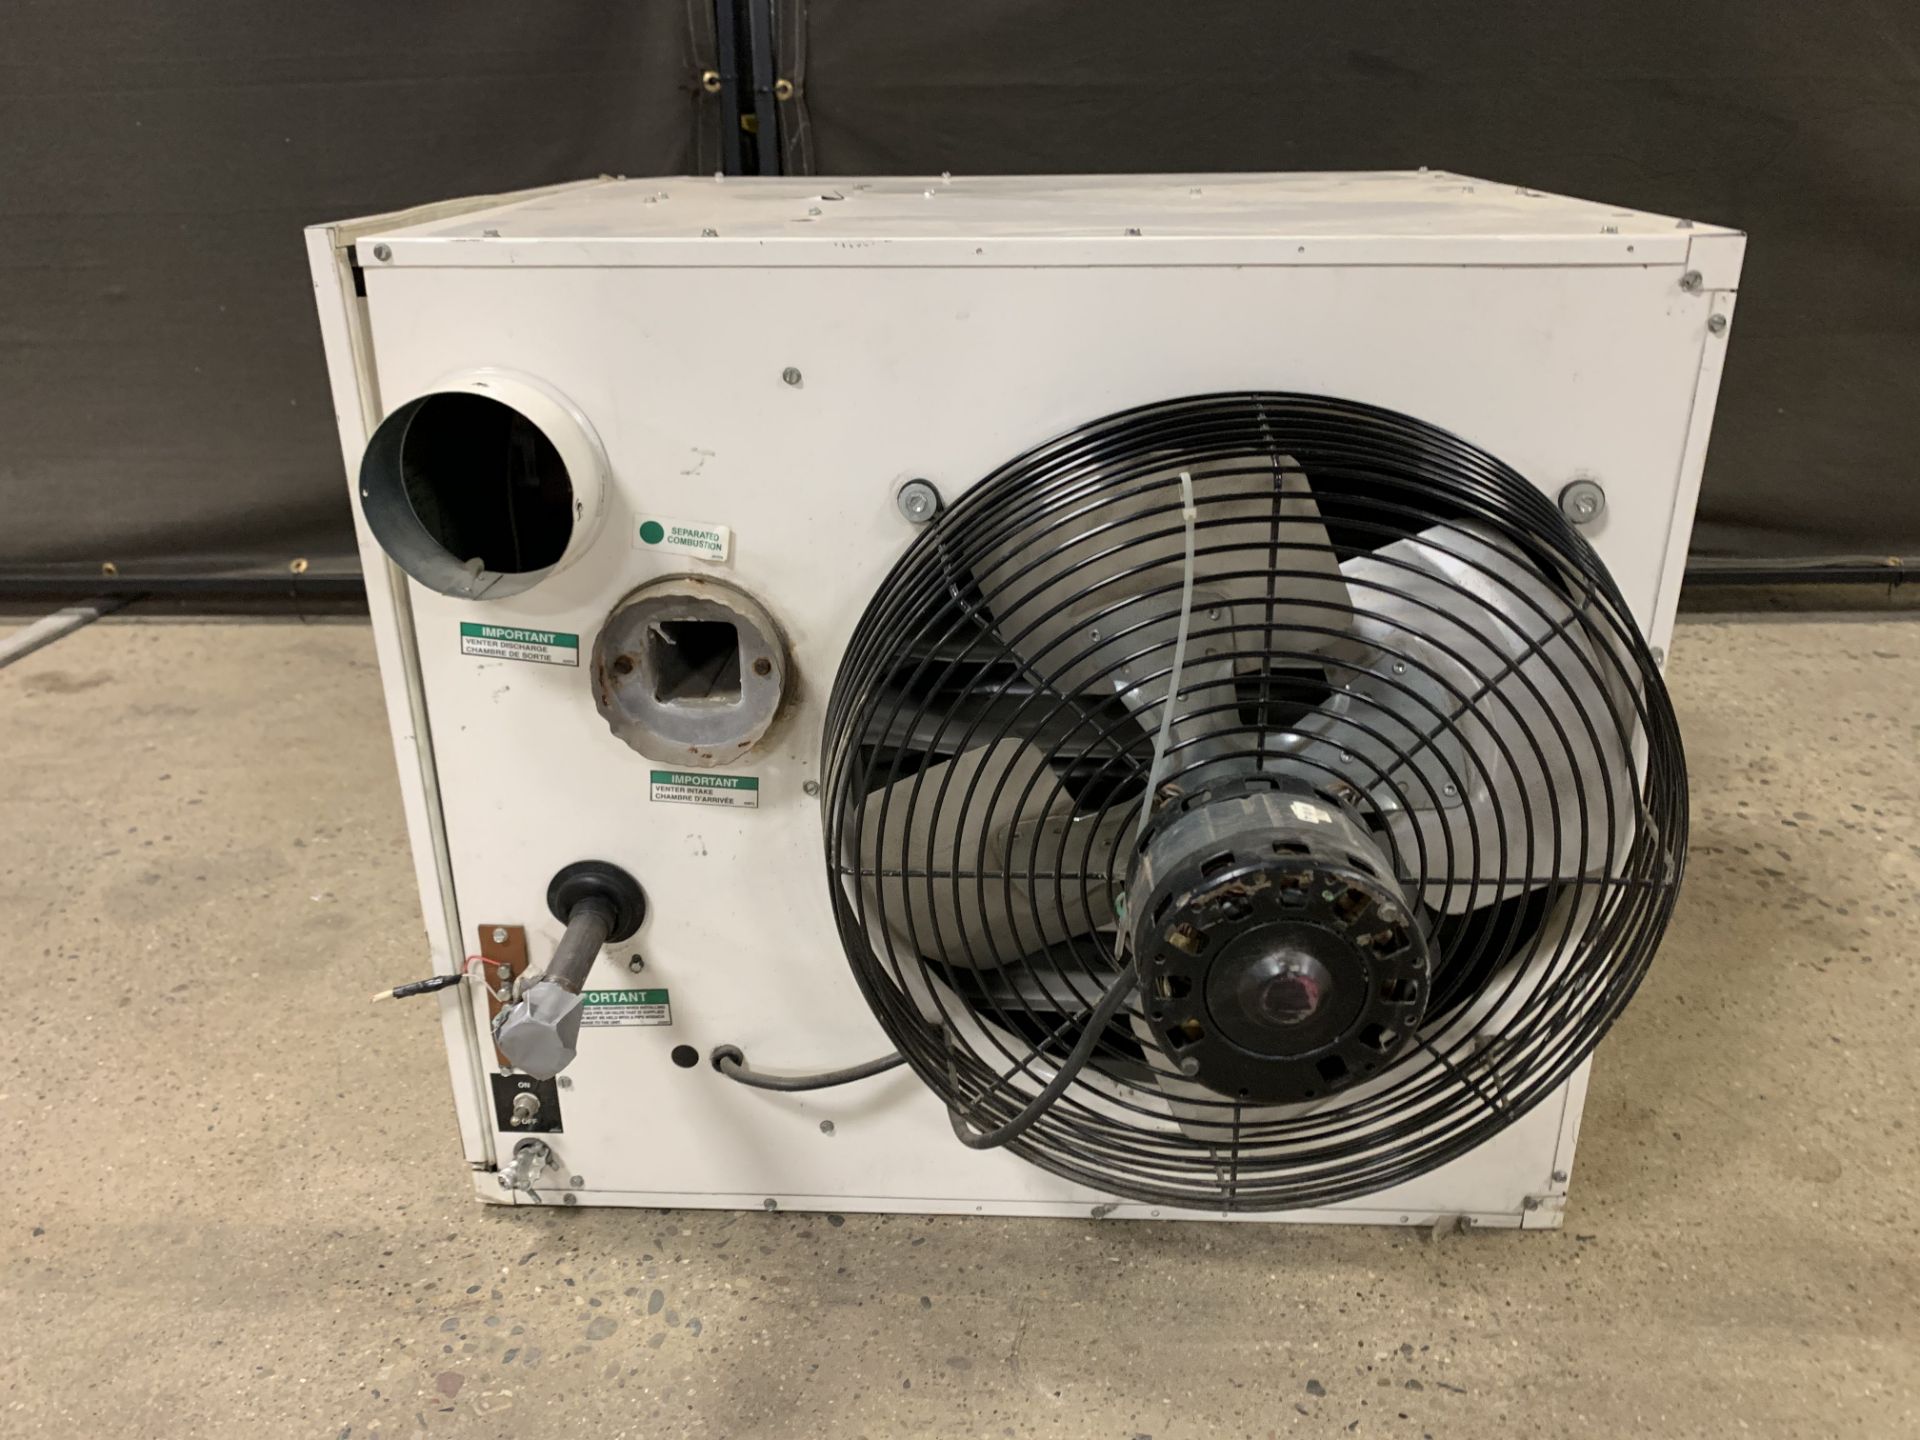 REZNOR V3 SERIES UDAS125 GAS-FIRED SEPARATED COMBUSTION HEATER UNIT, INPUT 120,000 BTUH, OUTPUT 99, - Image 6 of 12